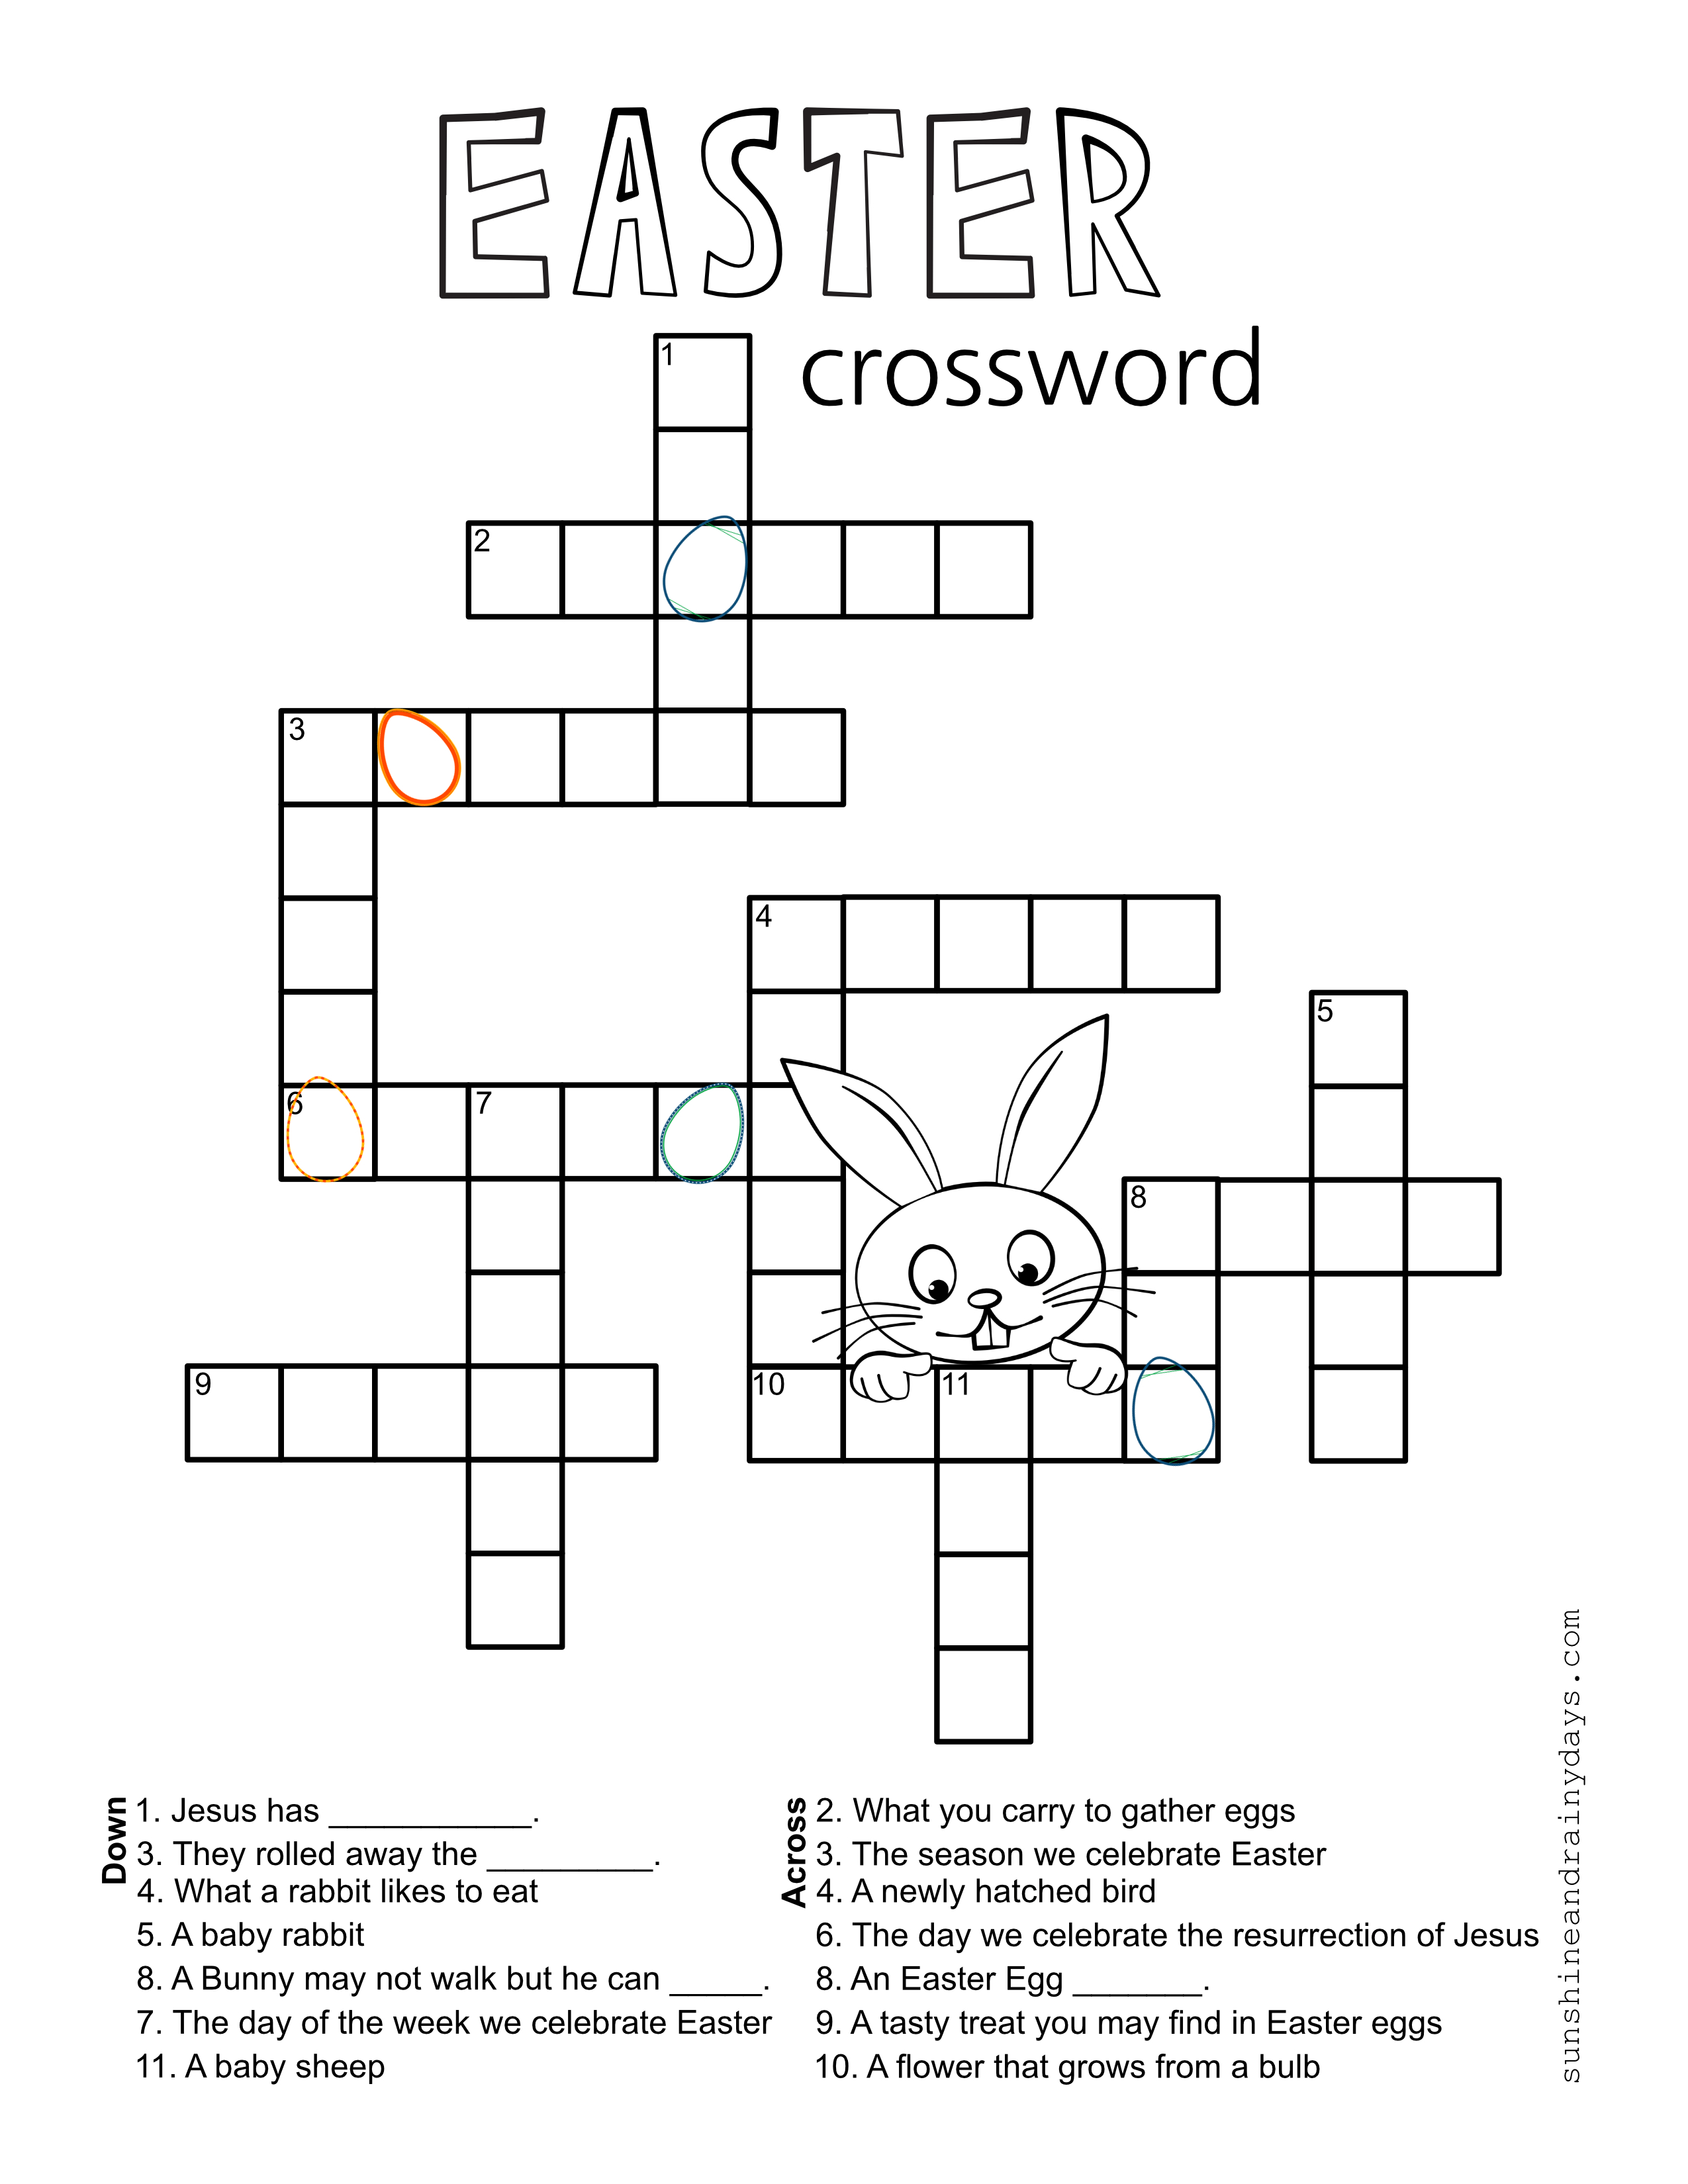 Easter Crossword Puzzle - Sunshine And Rainy Days - Printable Crossword Puzzles Easter